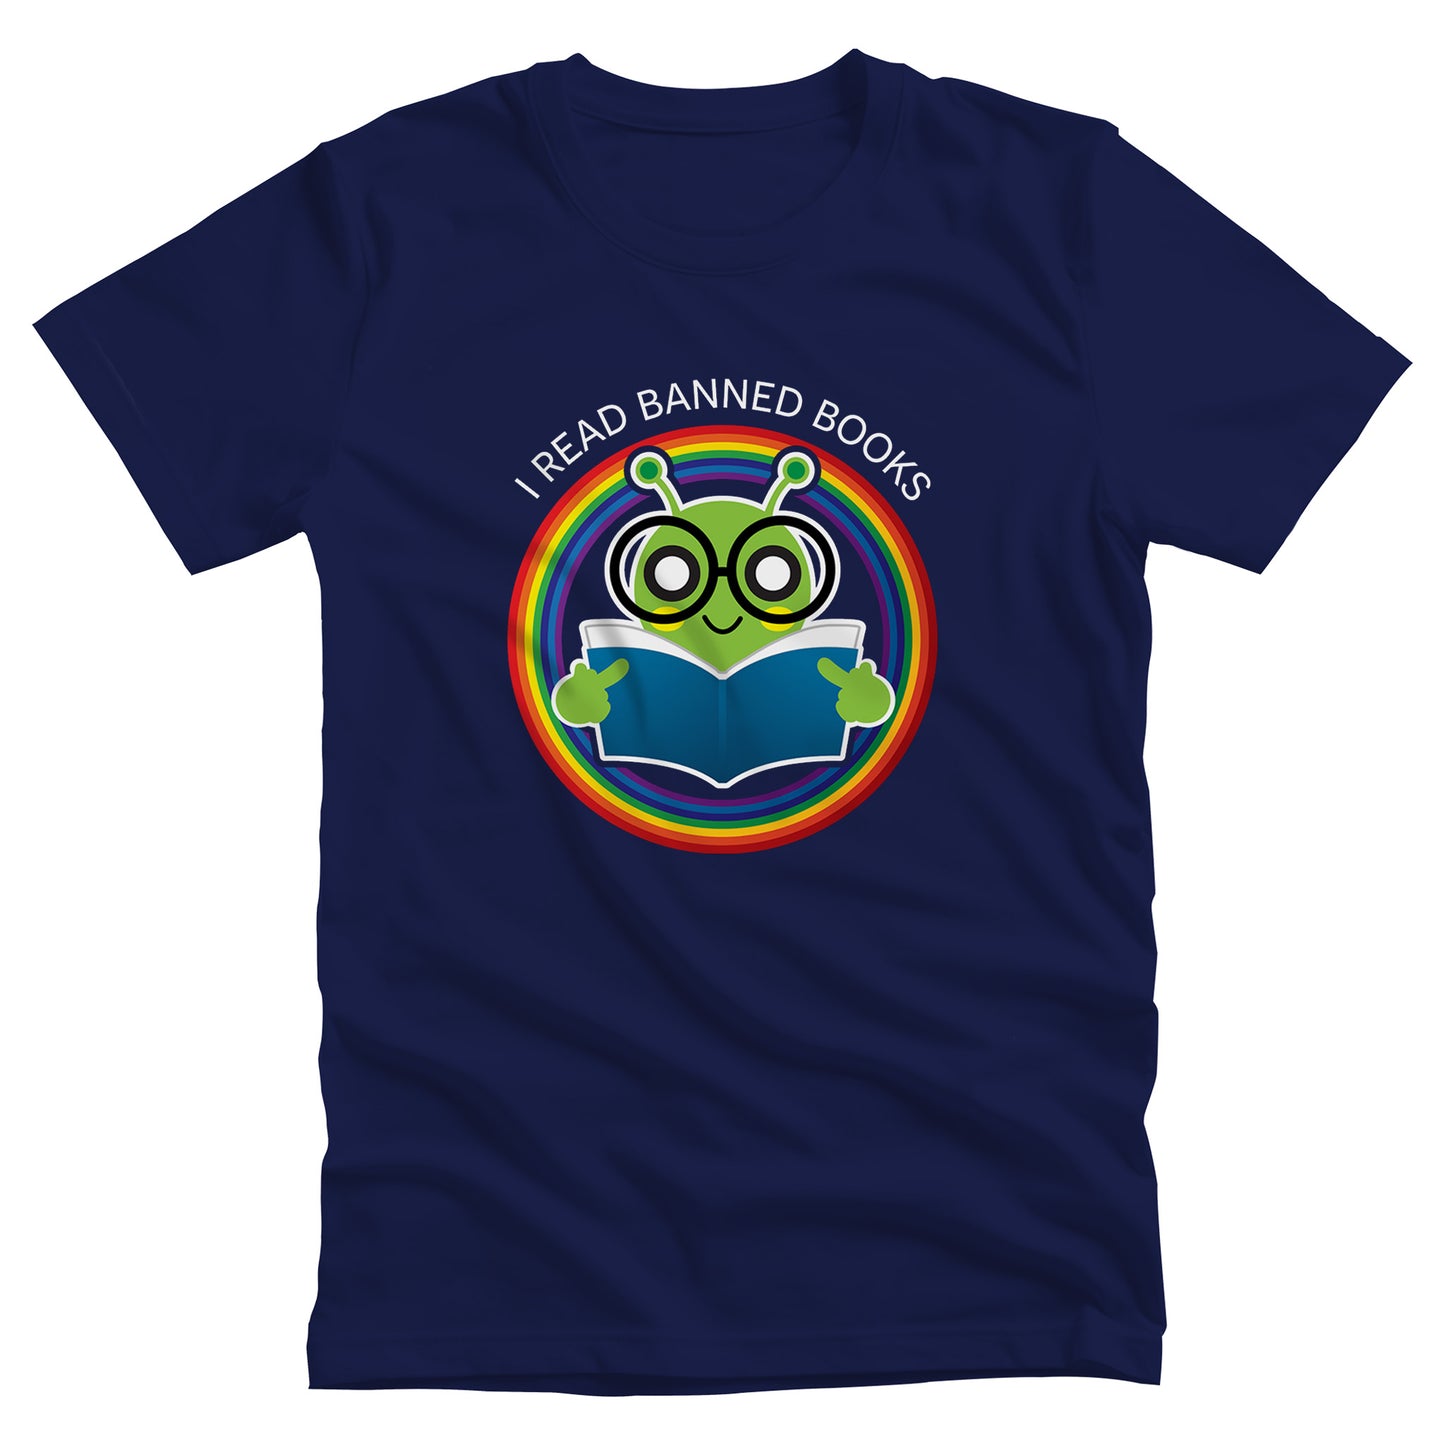 Navy Blue unisex t-shirt with a graphic of a bookworm with large eyeglasses reading a book. The bookworm is subtly holding up its middle fingers. The image is inside a circle that has rainbow colors. Arched over the top of the graphic are the words “I READ BANNED BOOKS.”